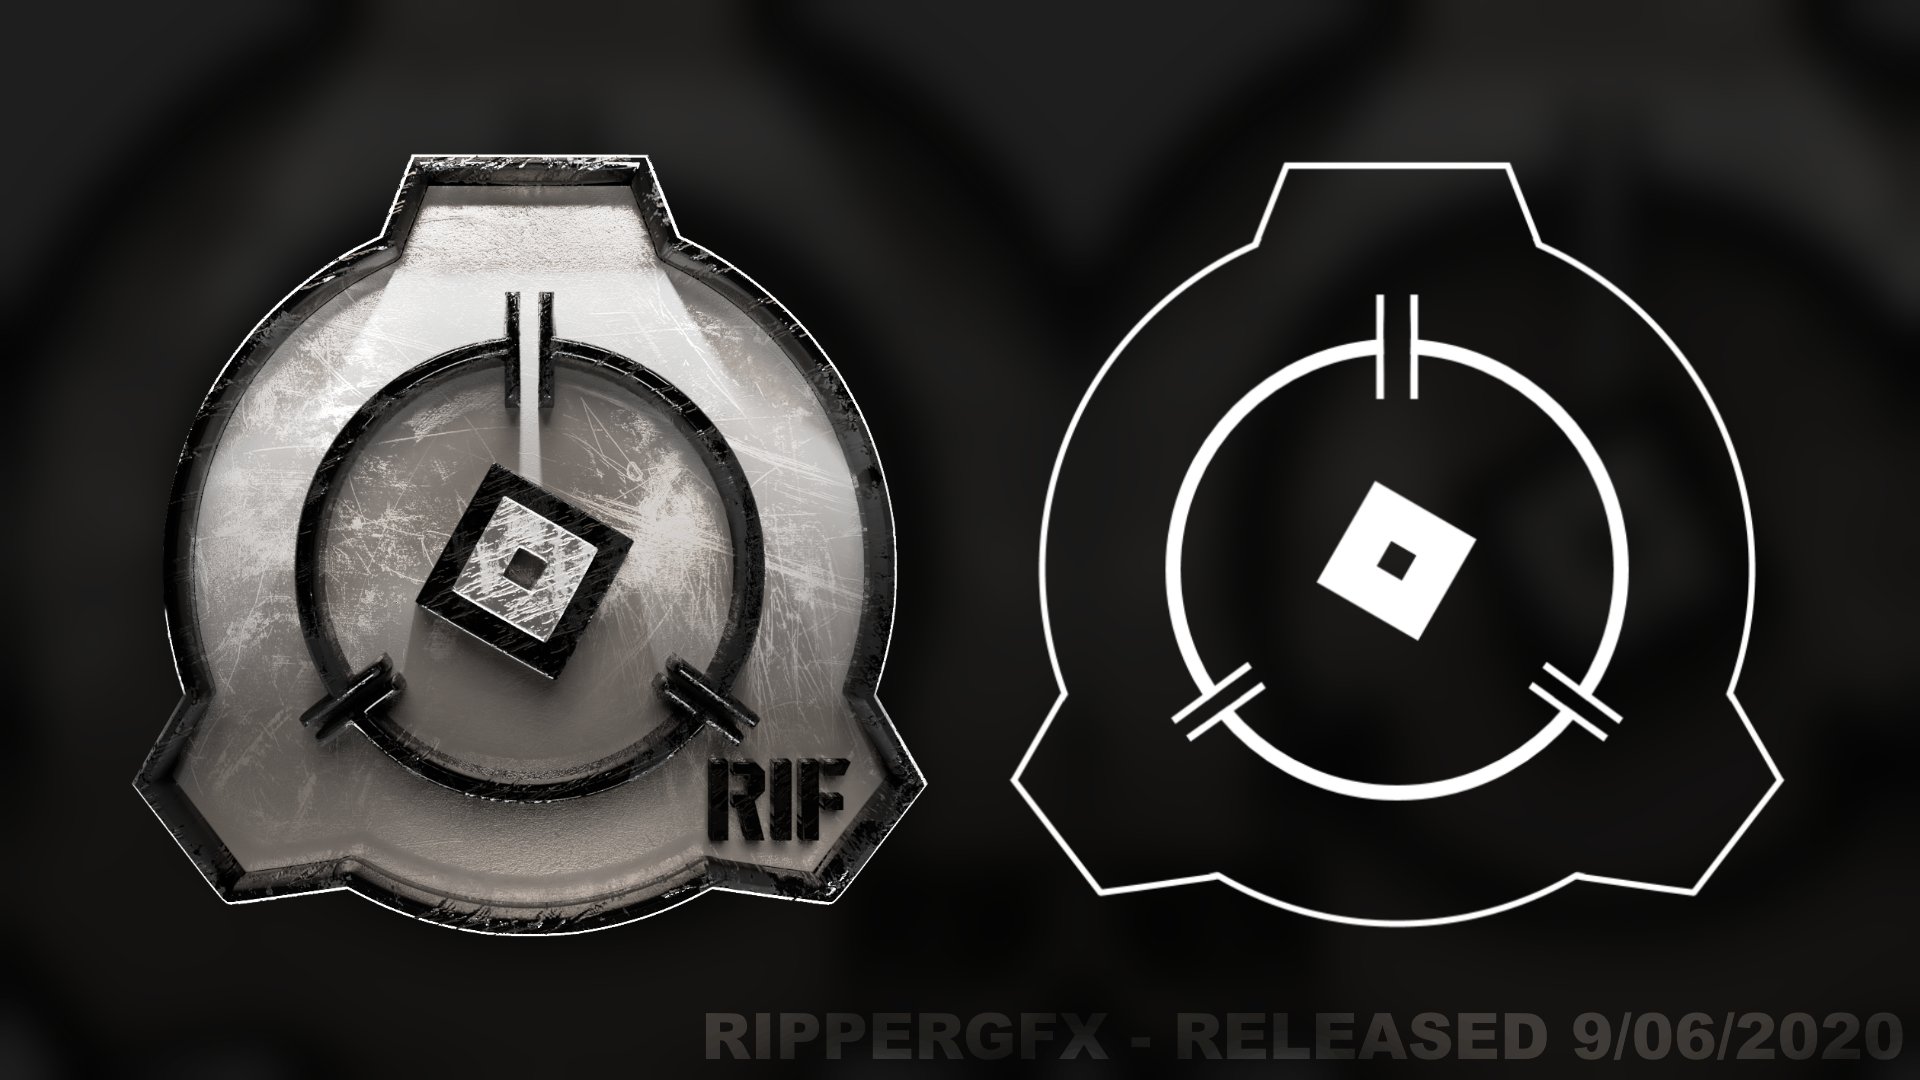 RipperGFX on X: A simple SCP logo for @Gavineoo Full resolution